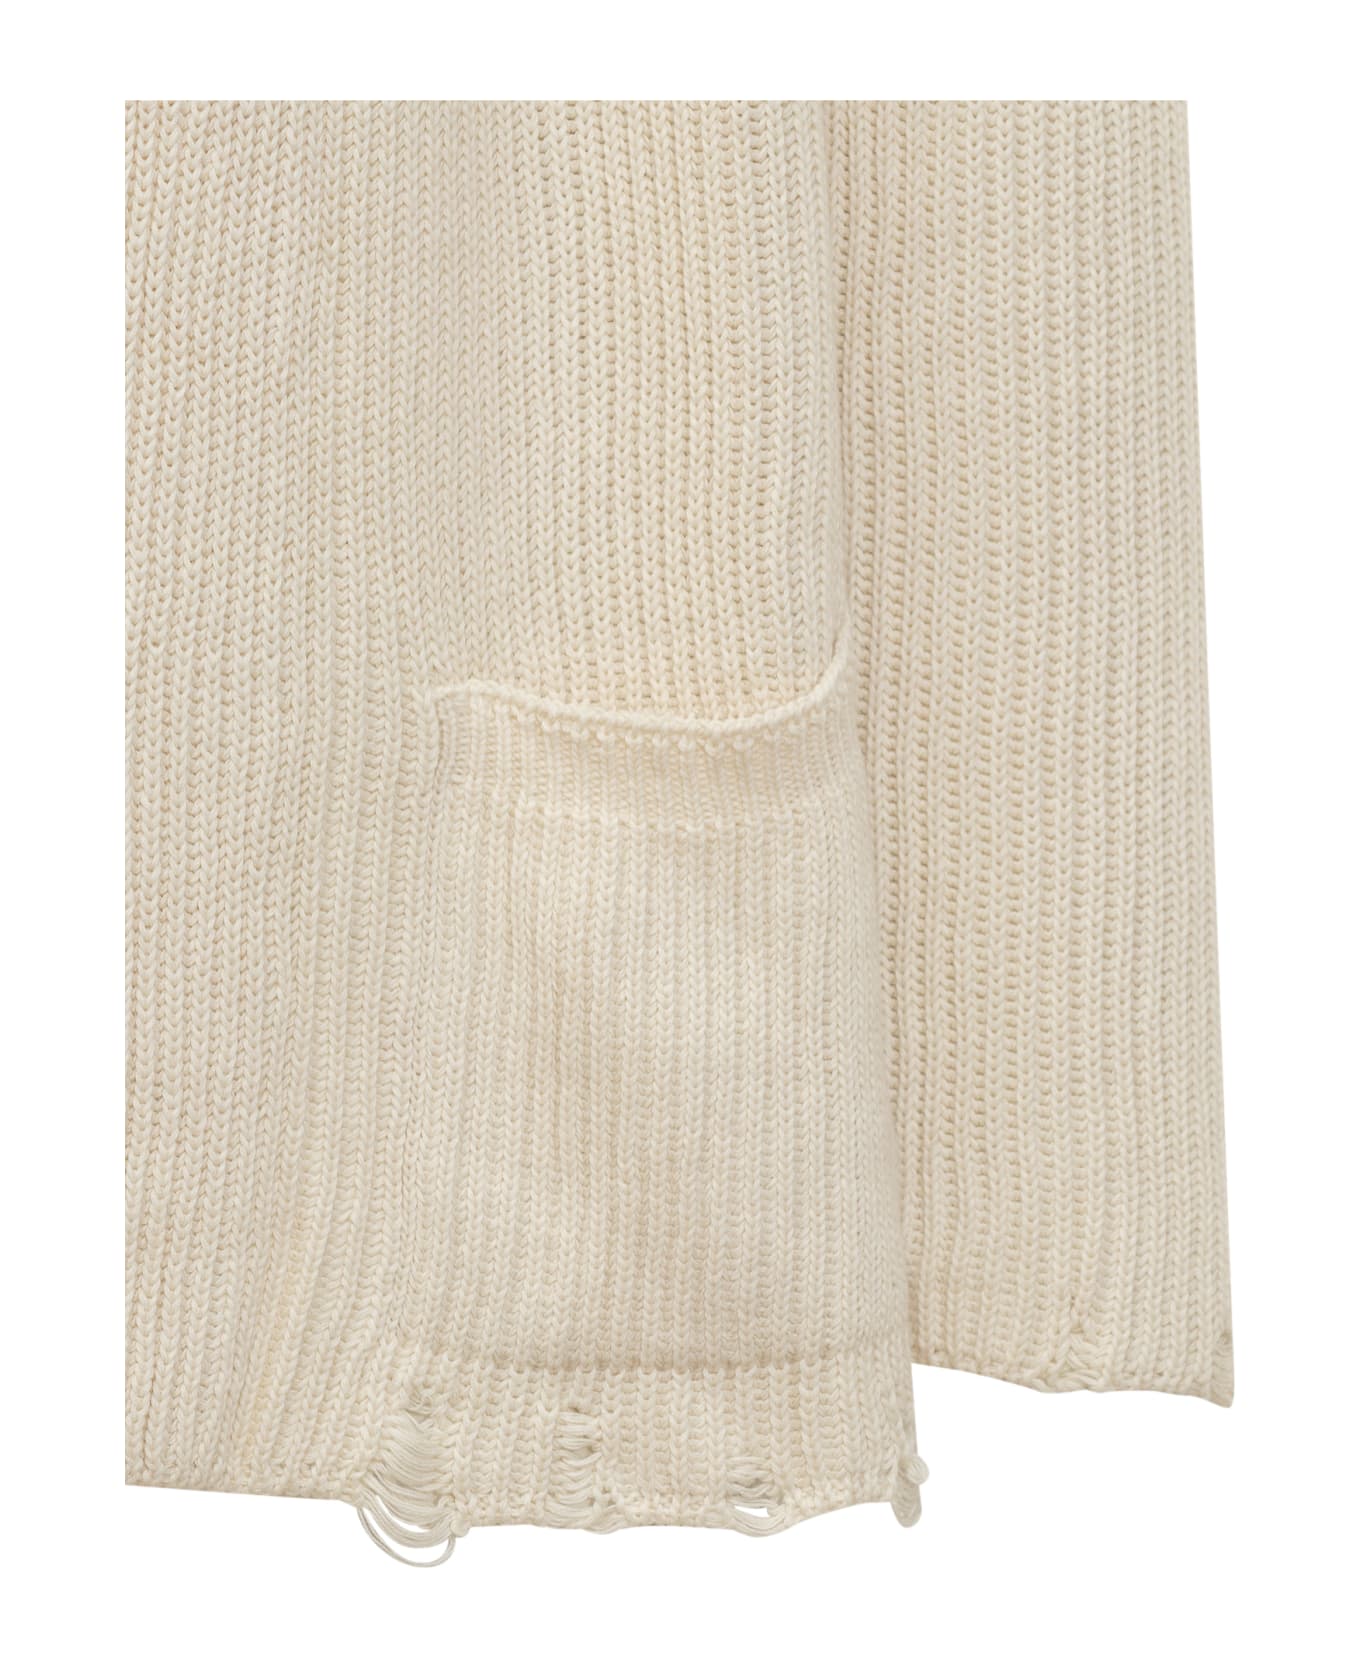 A Paper Kid Sweater Cardigan - White